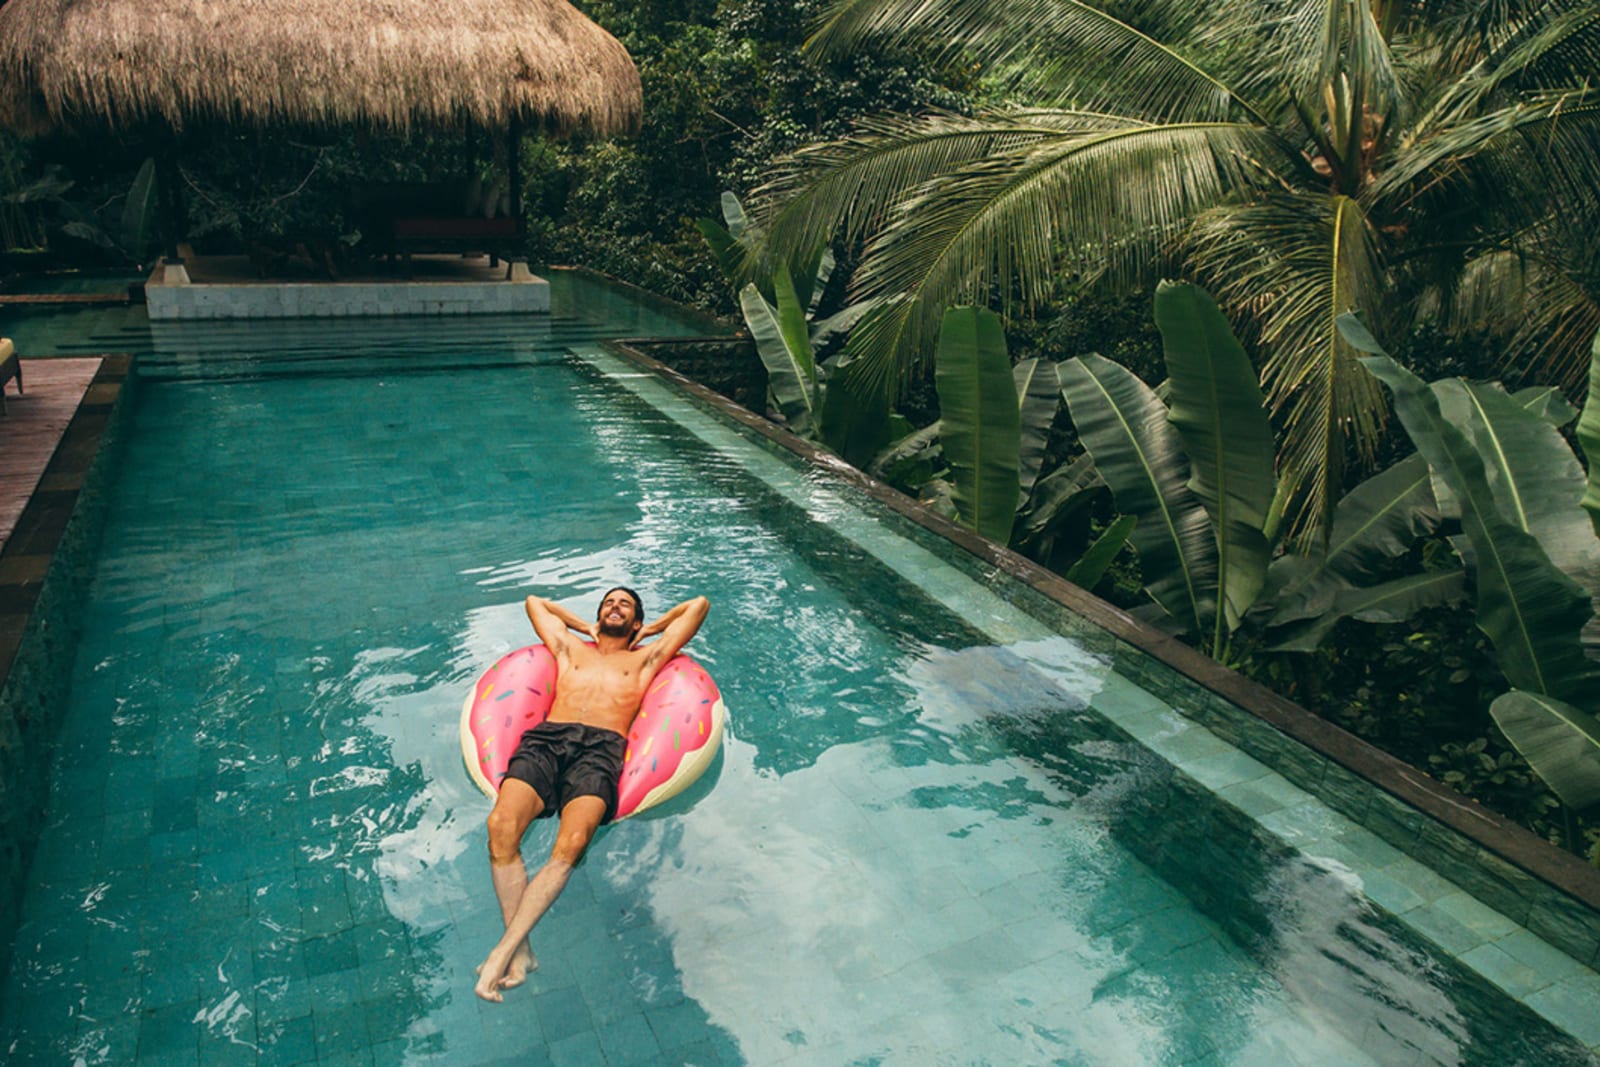 Man floating on a doughnut-shaped inner tube in a pool at a Mexico resort